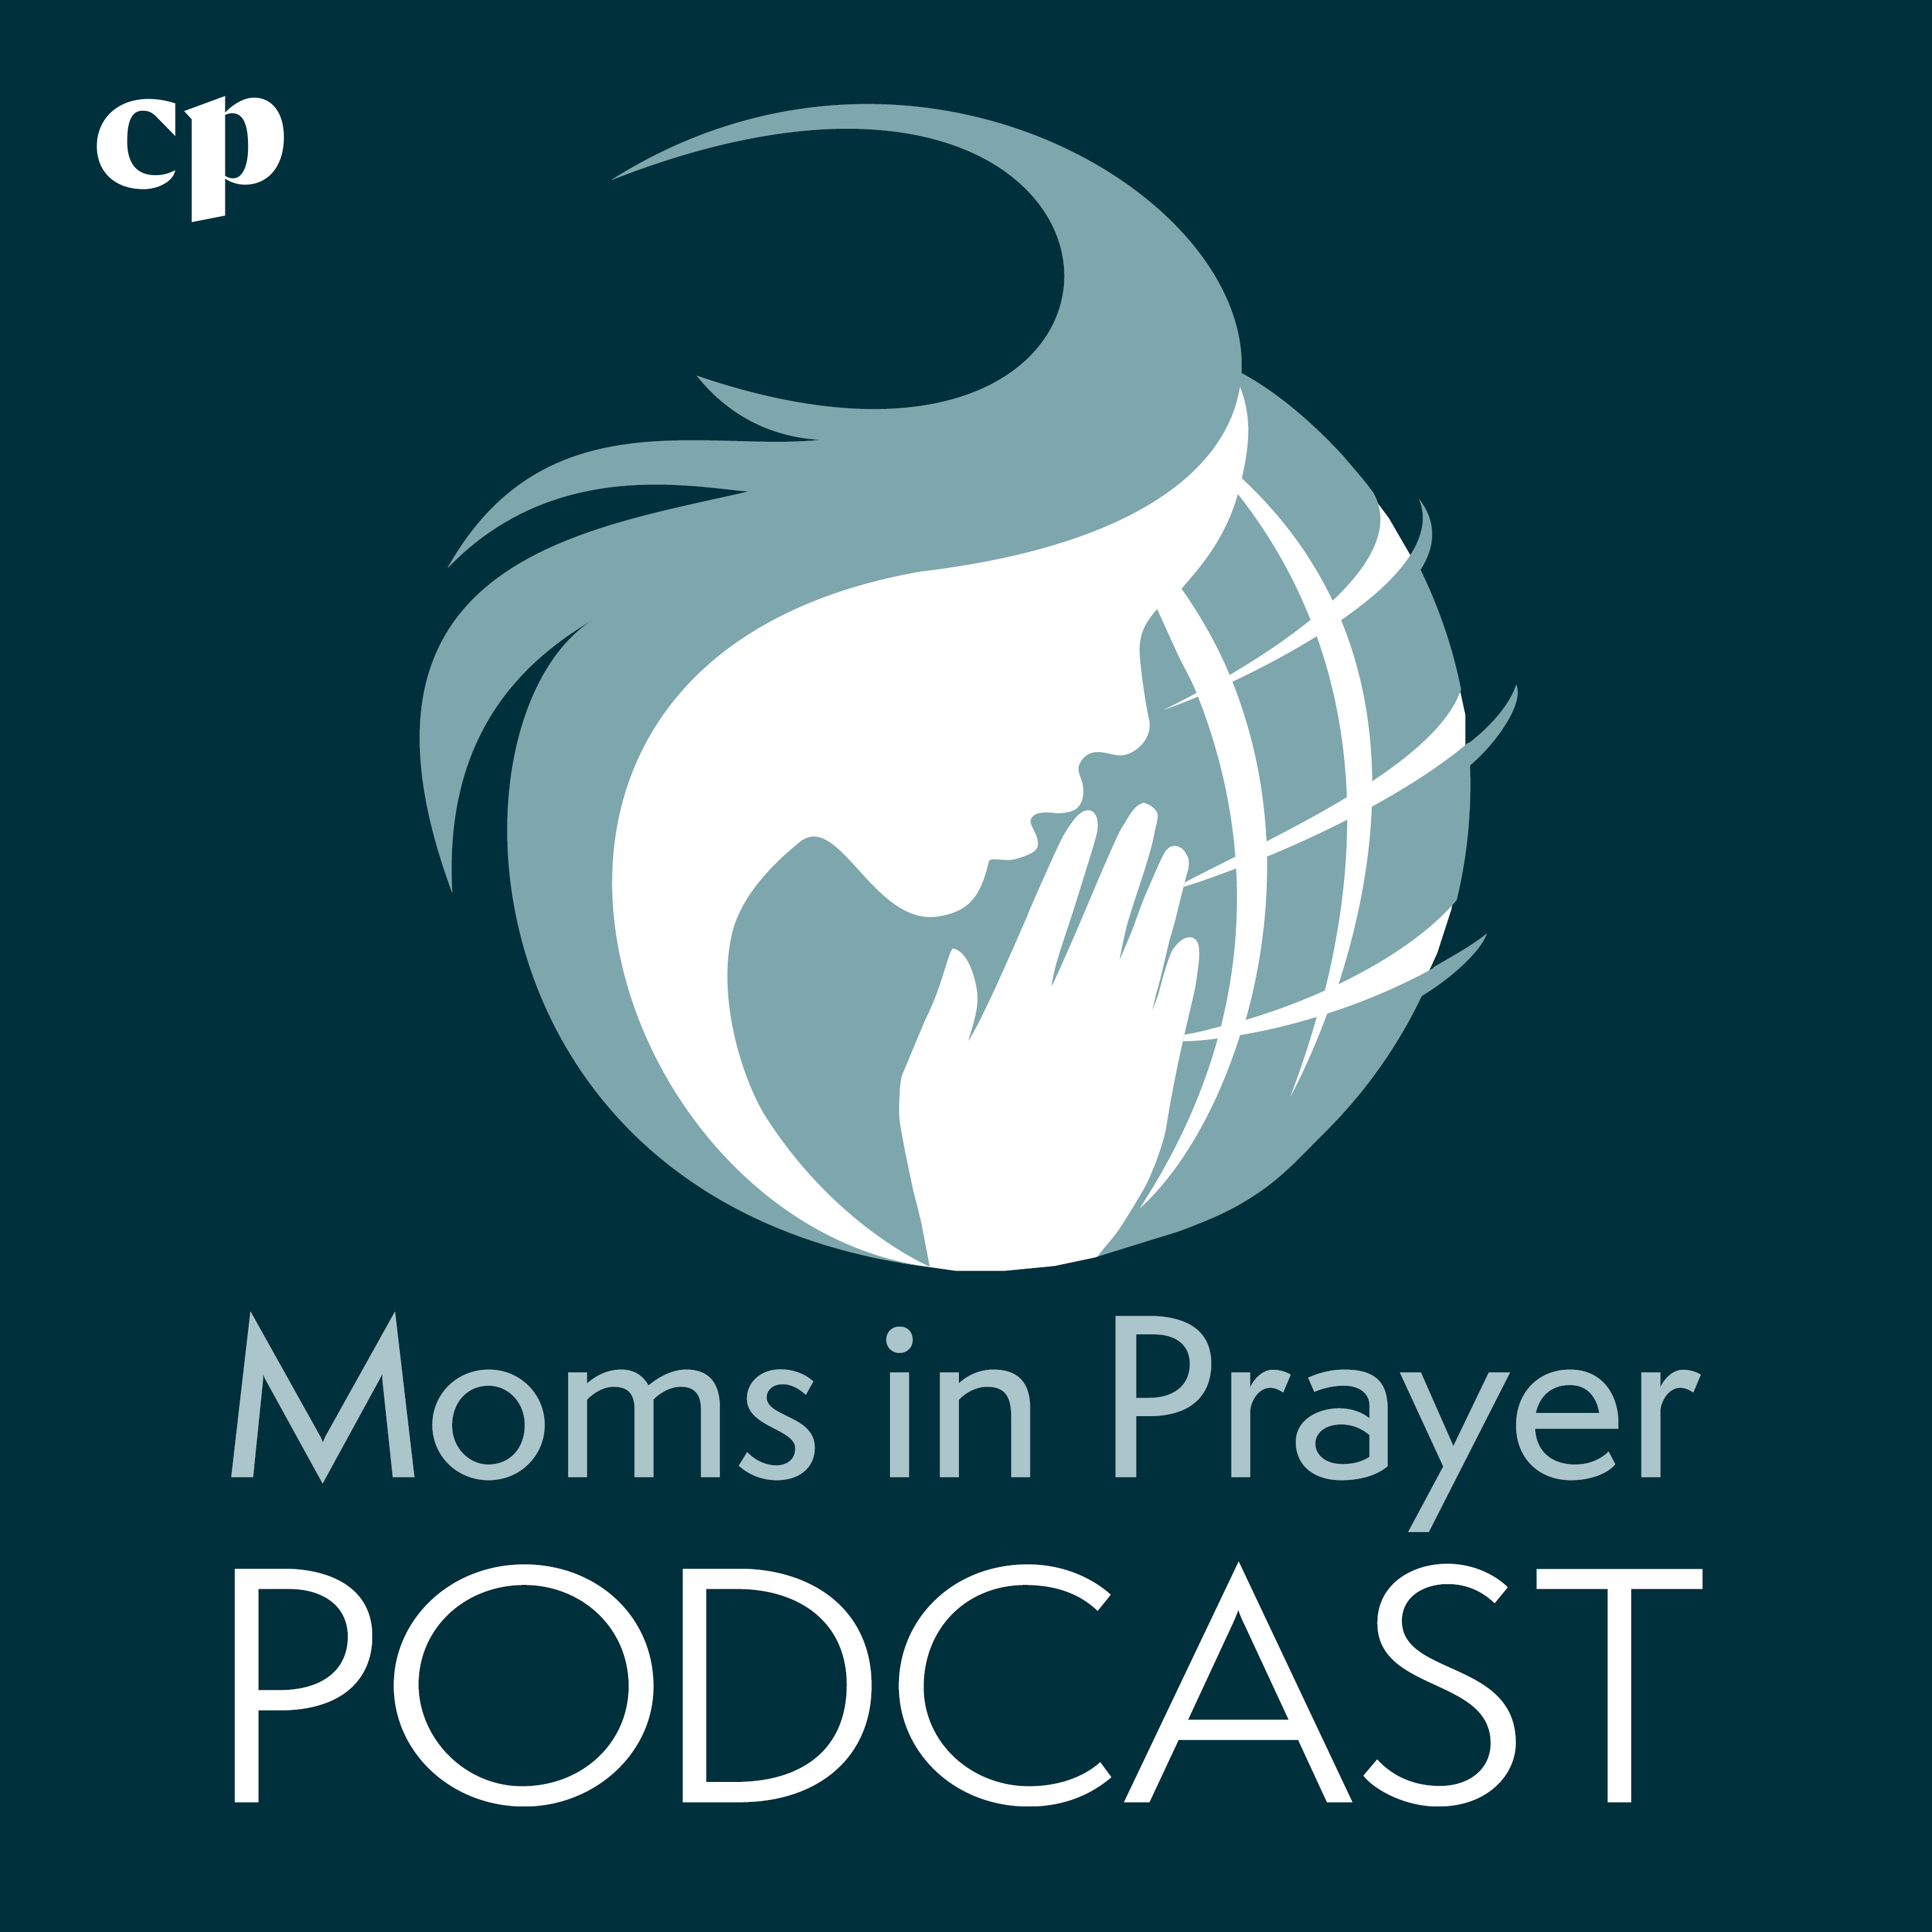 Episode 132 - 2020 Global Report: Praying for South America with Veronica Vanzetti and Deisy Ordonez